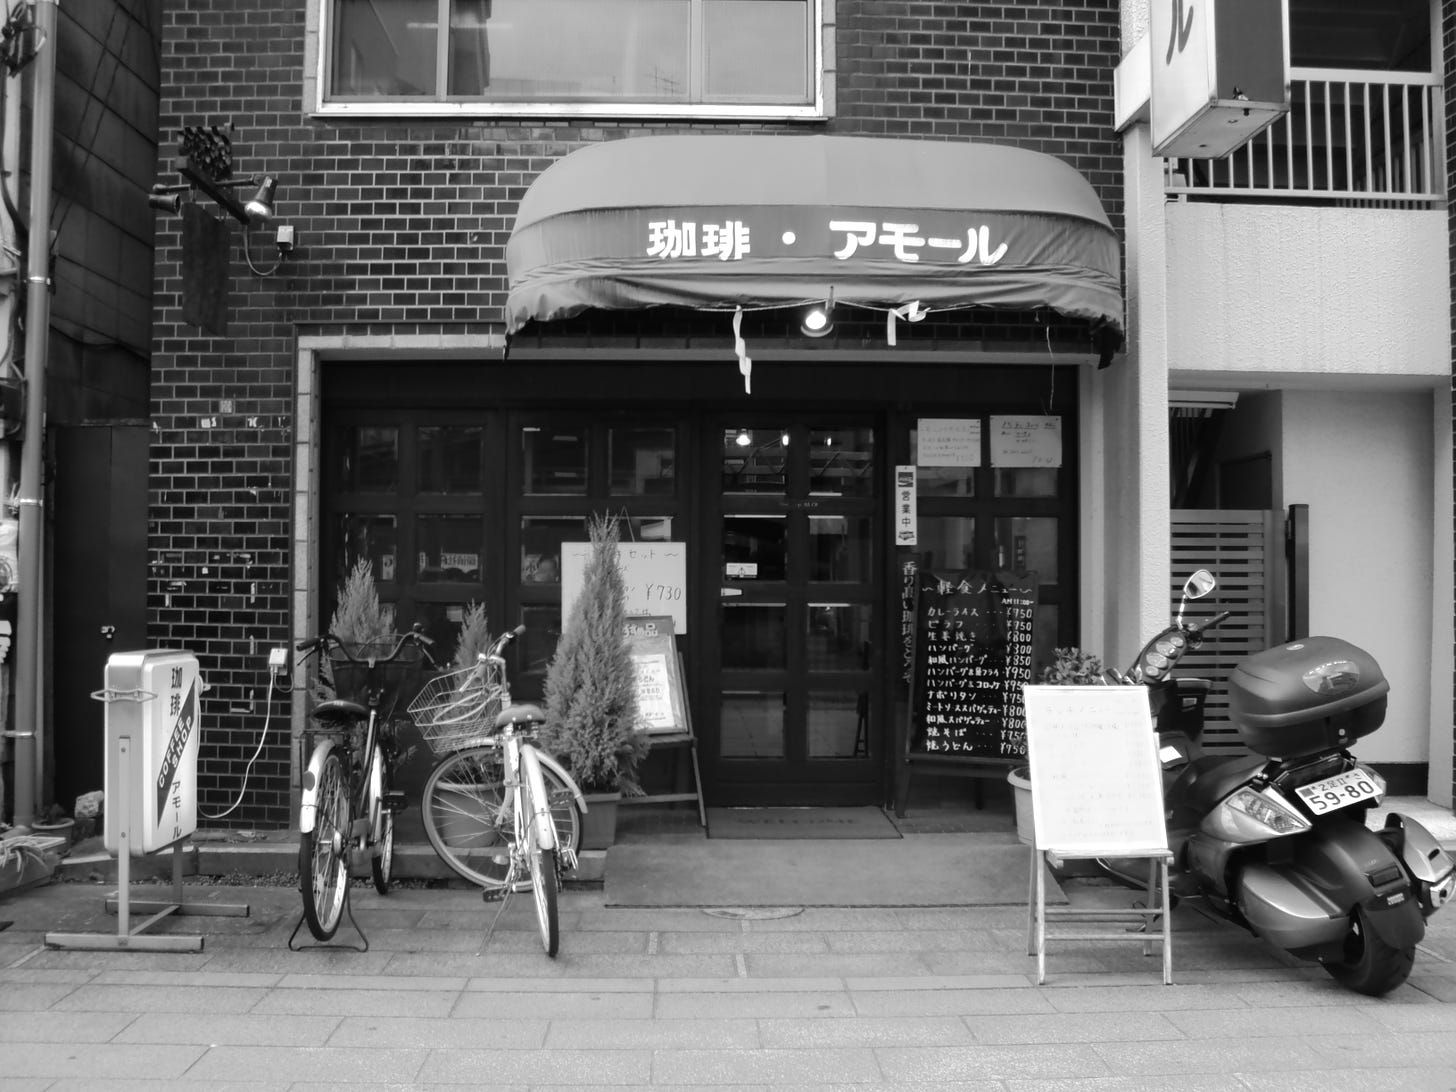 View of a shop from the outside. Two bicycles and a moped are parked right in front of it. Image is in black and white.